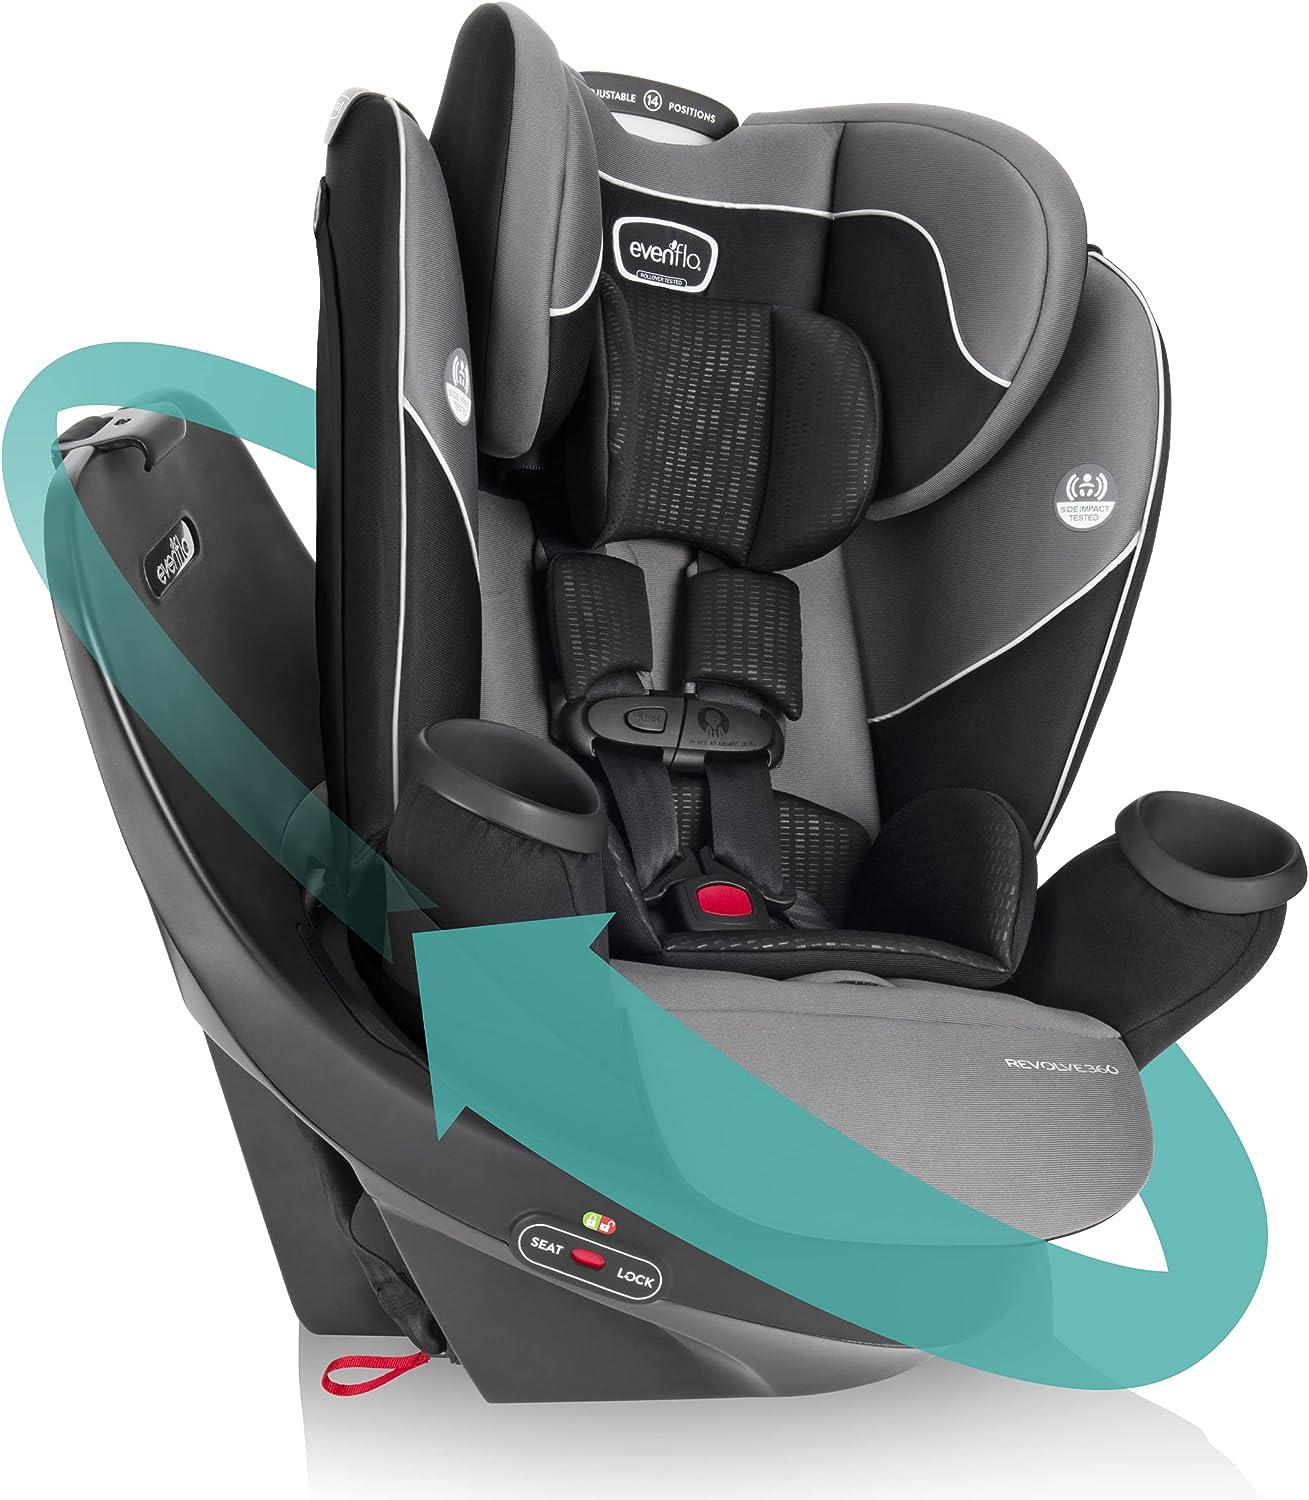 Evenflo Revolve 360 All-In-One Car Seat - Amherst Grey